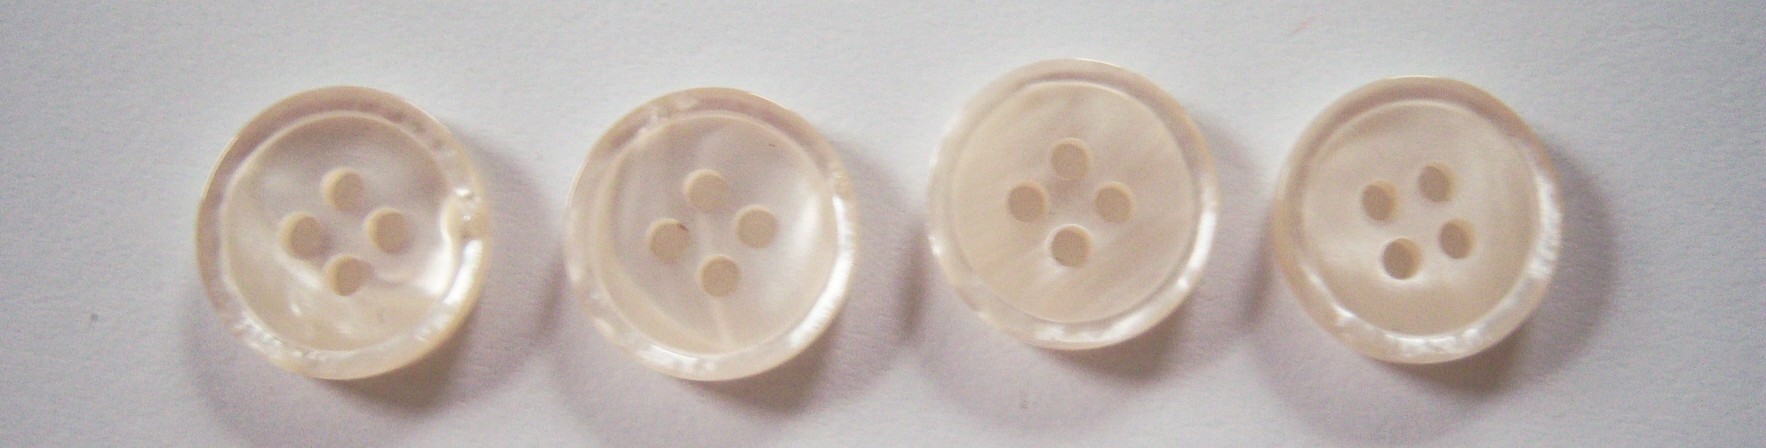 Ivory 9/16" Pearlized 4 Hole Button